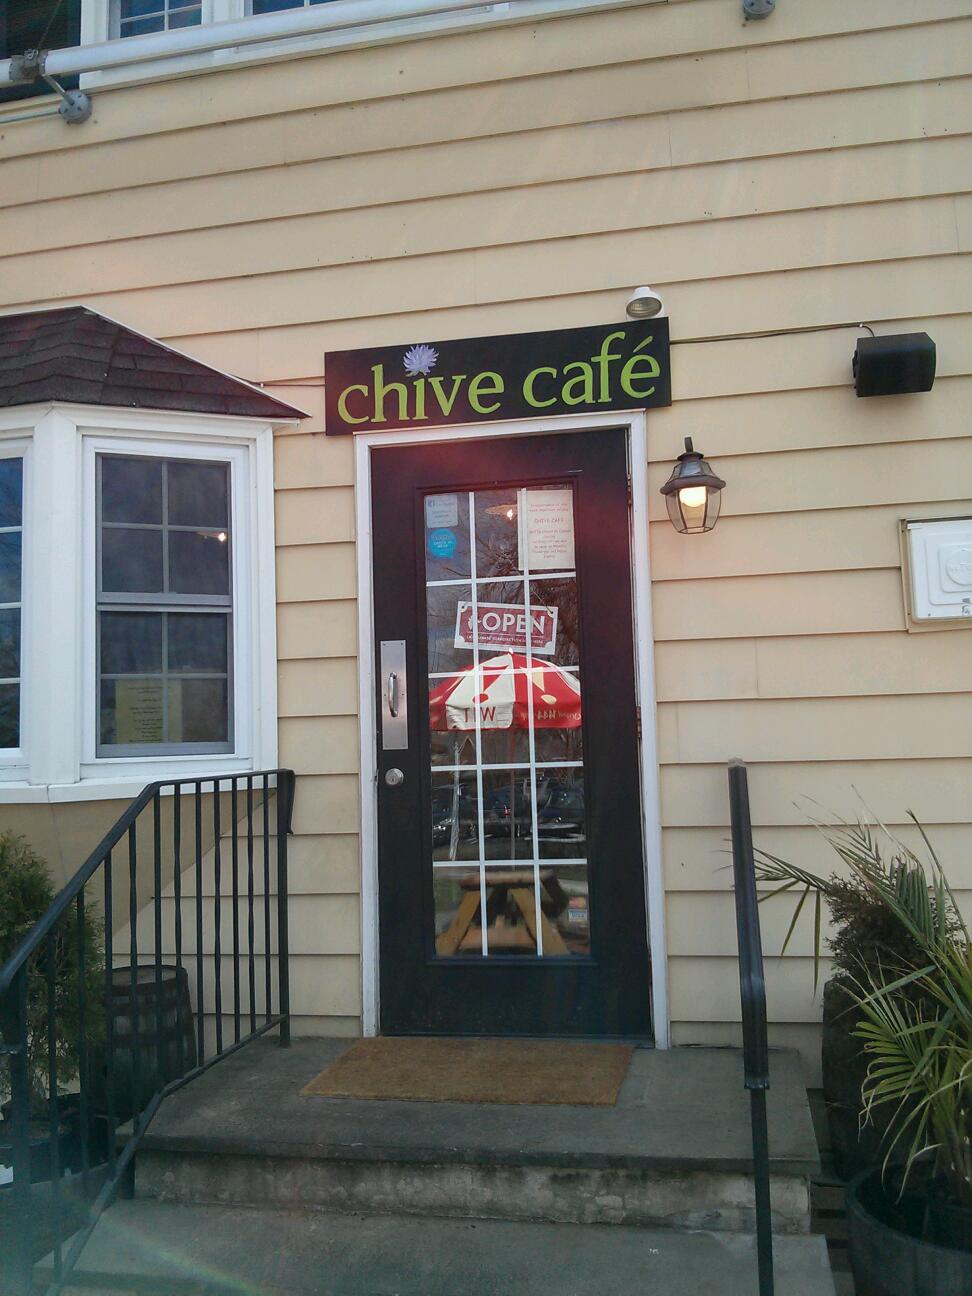 Chive Café & Catering